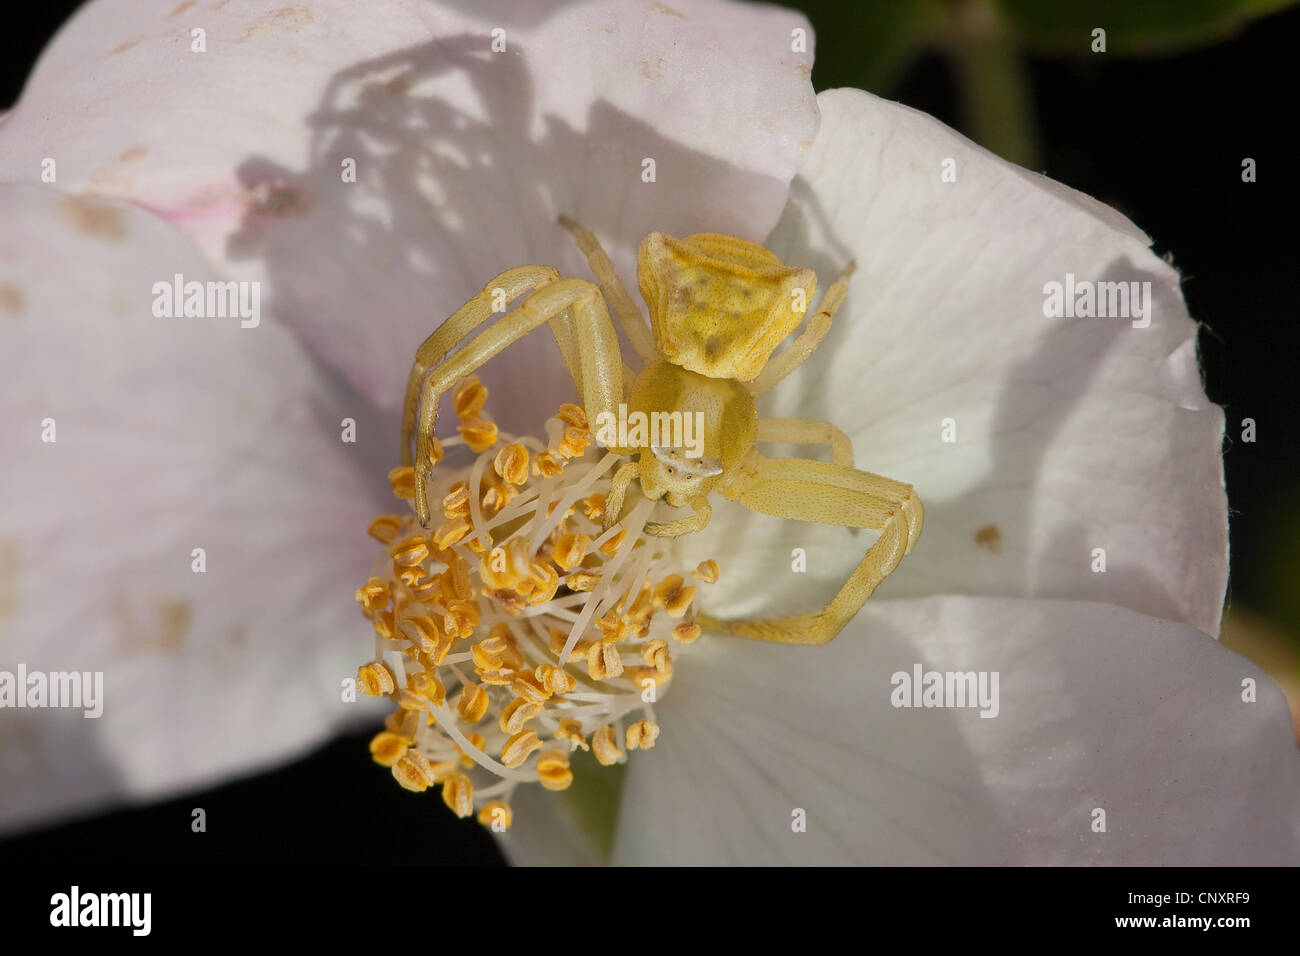 Crab Spider (Thomisus onustus), female waiting for prey in camouflage colouration on a blossom Stock Photo